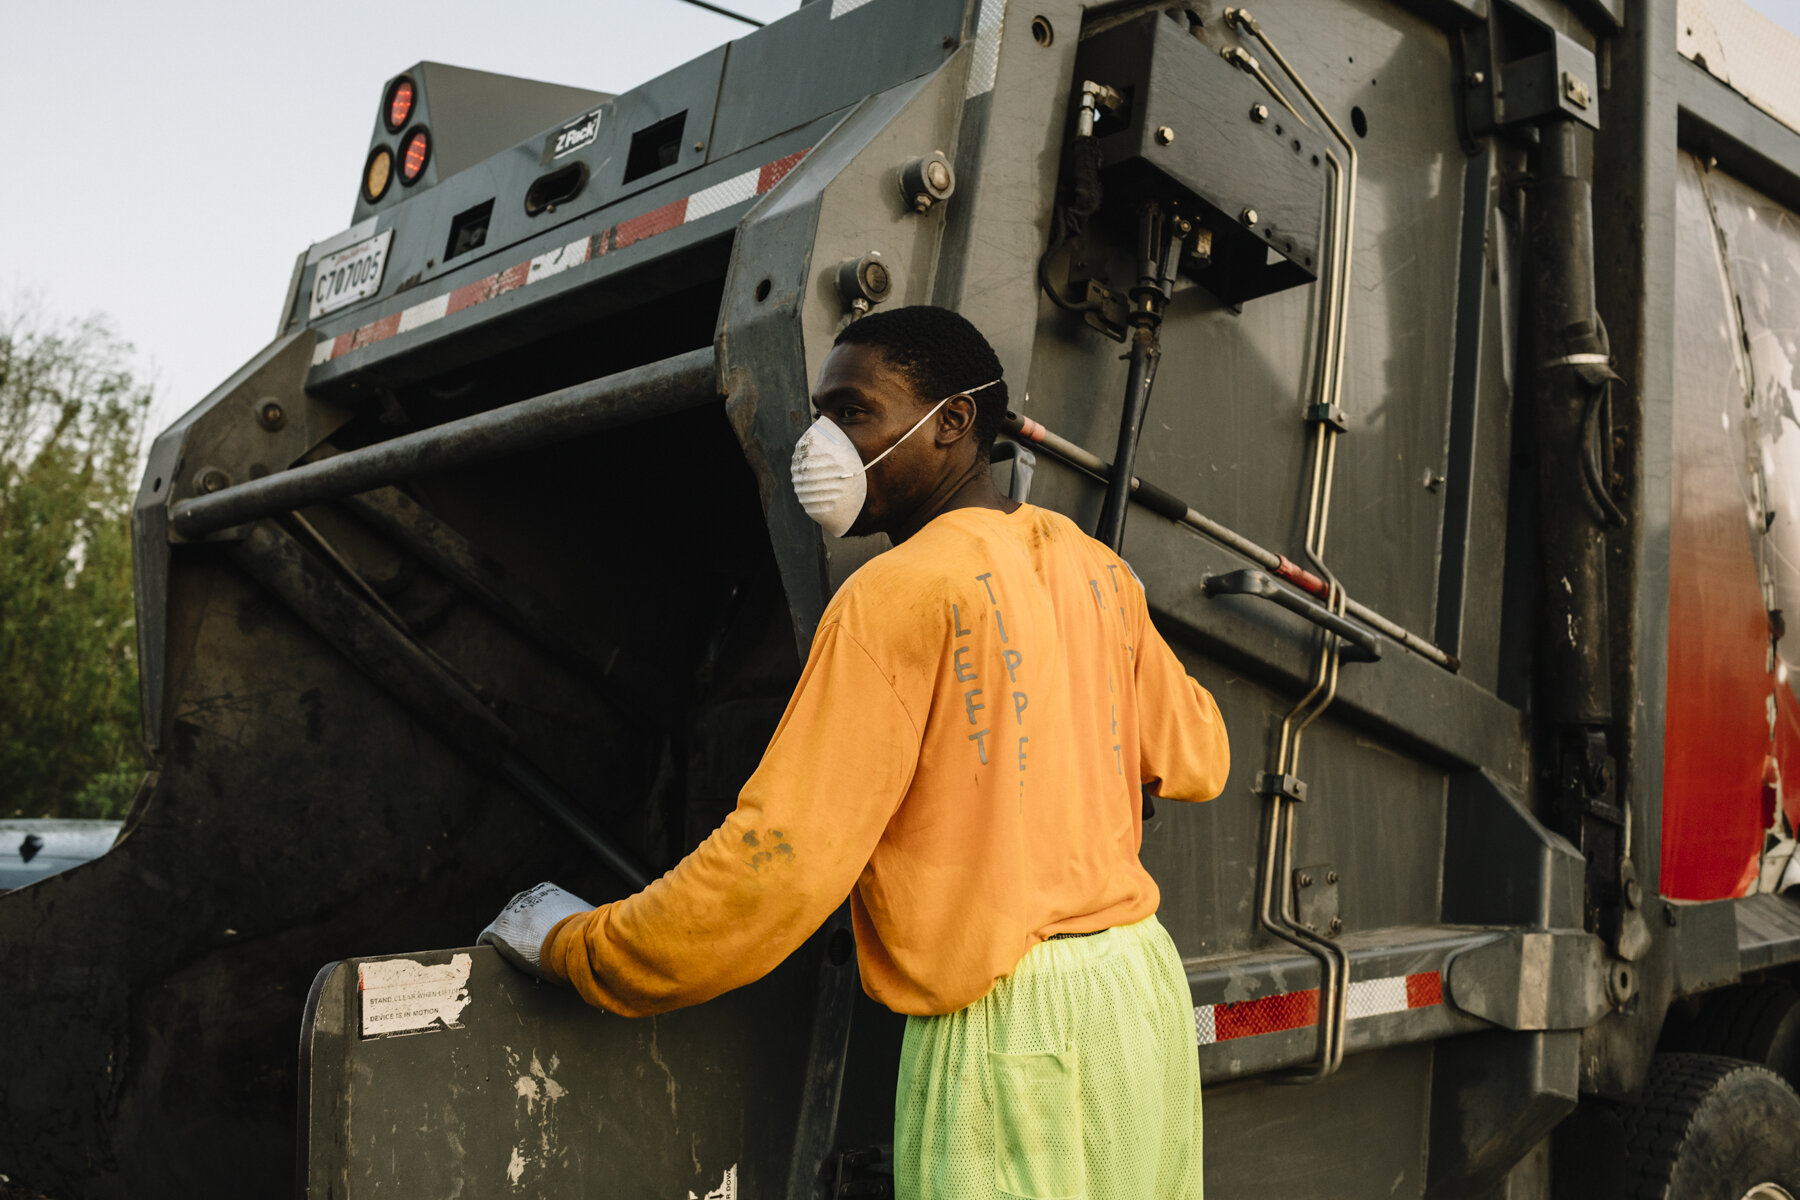  New Orleans, LA - March 24, 2020 - Bryan Bowman empties residential garbage cans into the back of a Metro Service Group truck in the 7th Ward of New Orleans. His employer has begun furnishing extra rubber gloves, facemasks, and handkerchiefs to thei